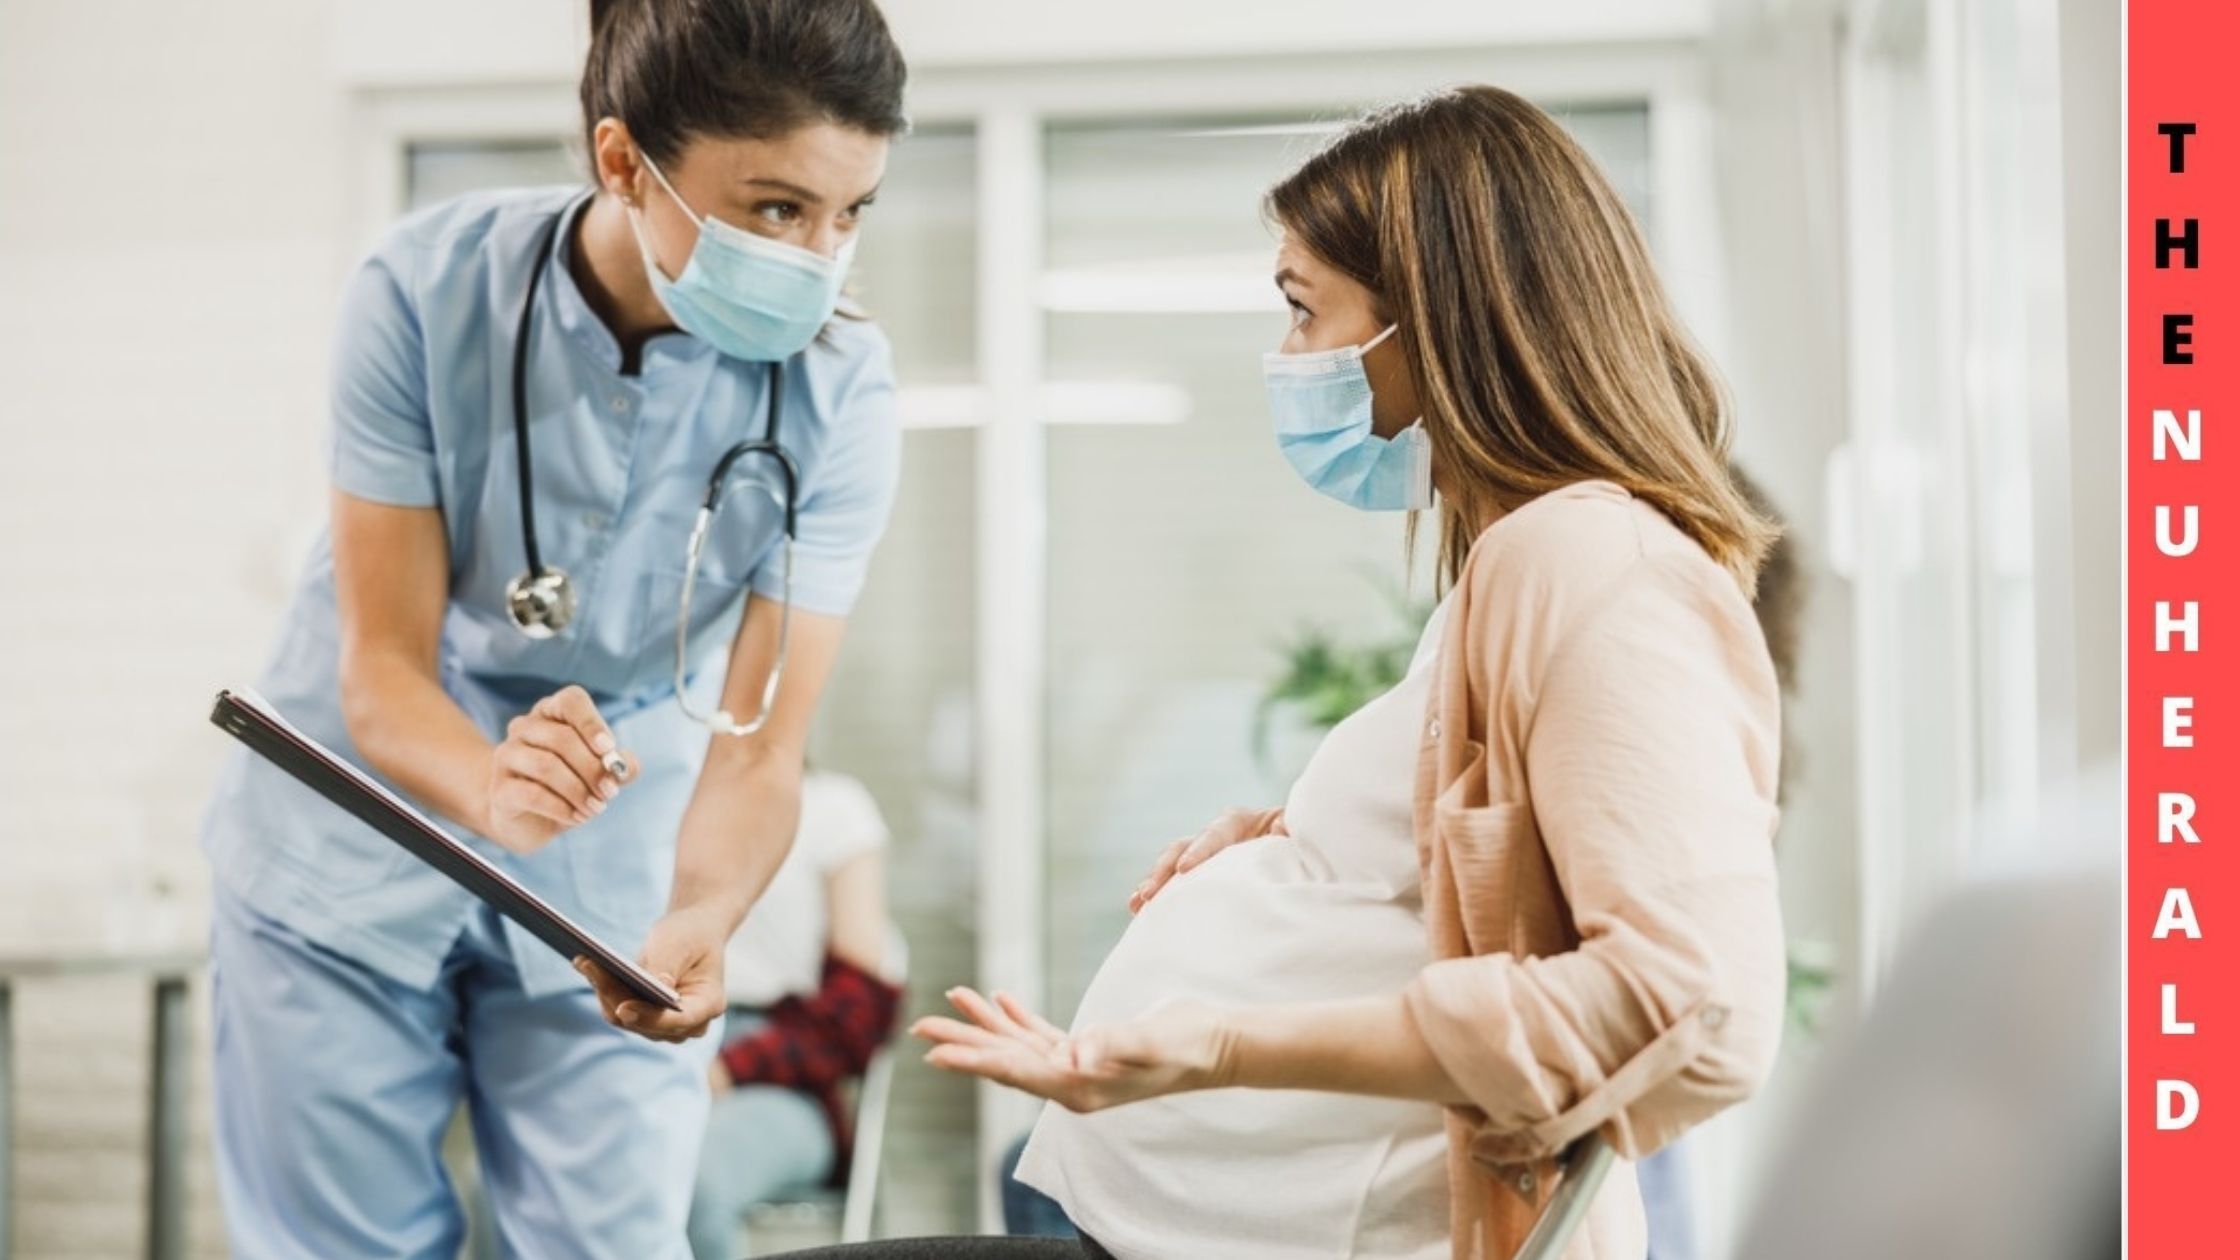 Maternity Care Becomes More Challenging During The Pandemic